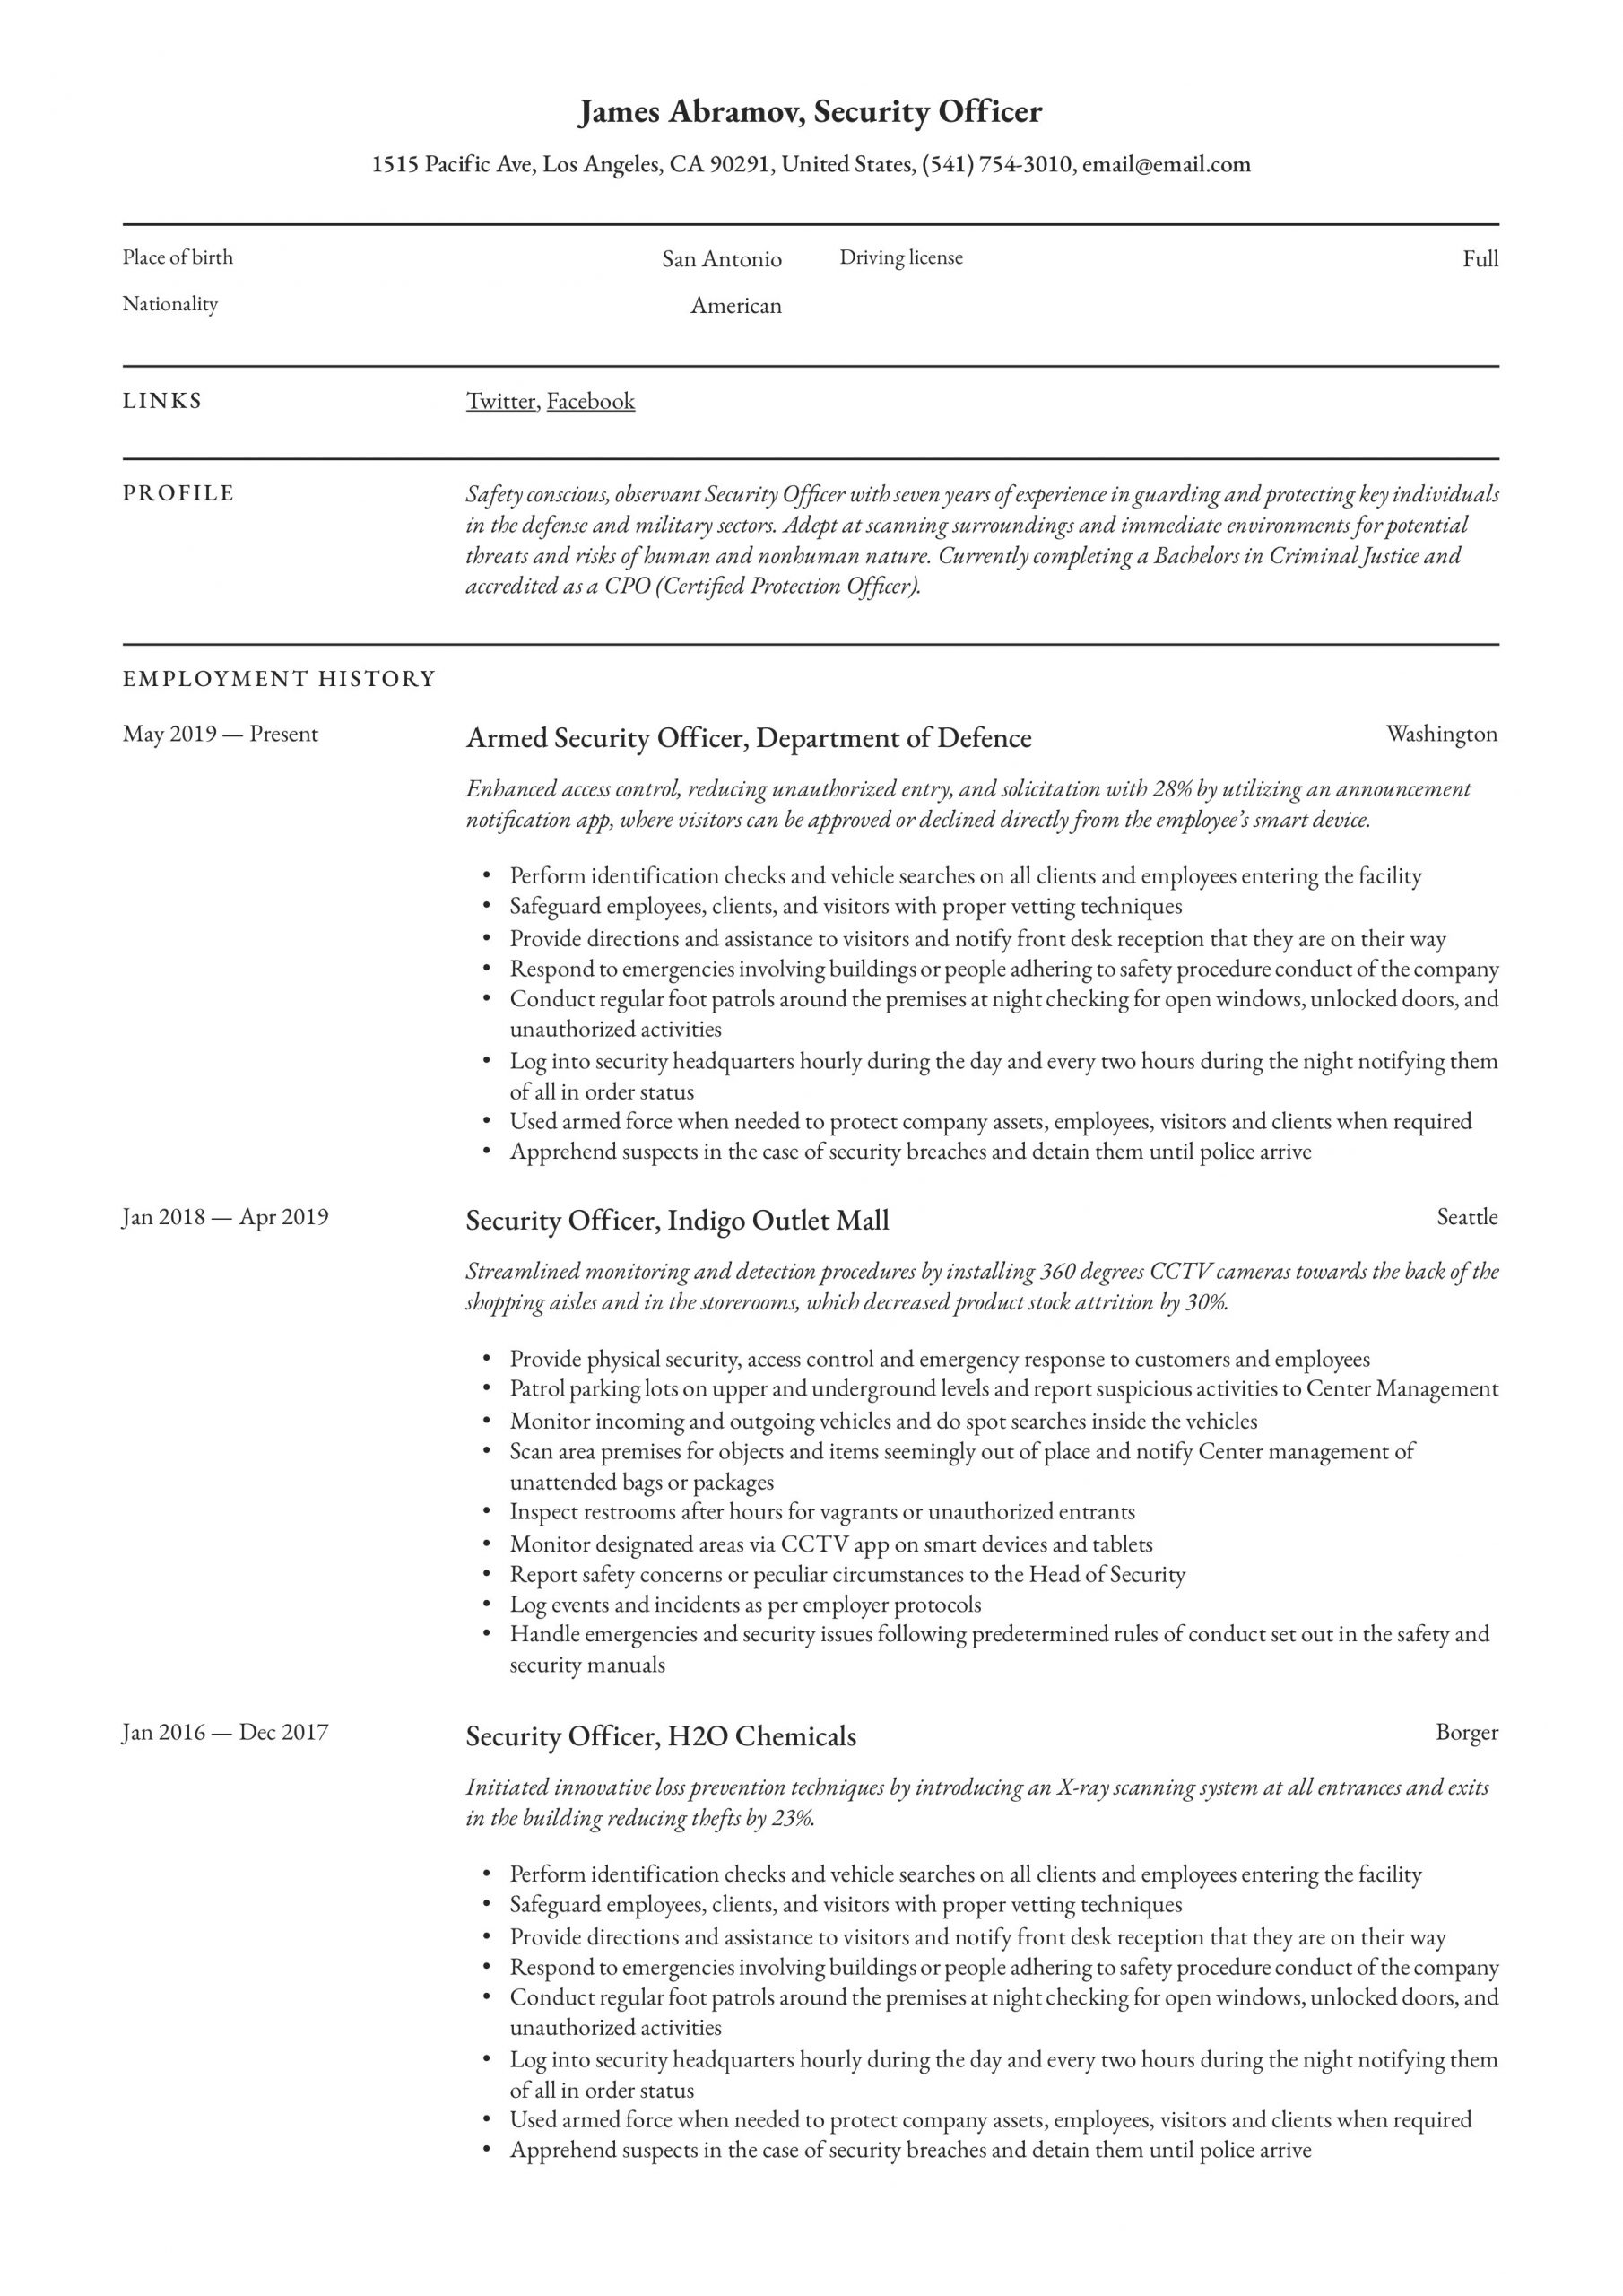 Sample Resume for Security Guard Pdf Security Officer Resume & Writing Guide  12 Resume Examples 2020